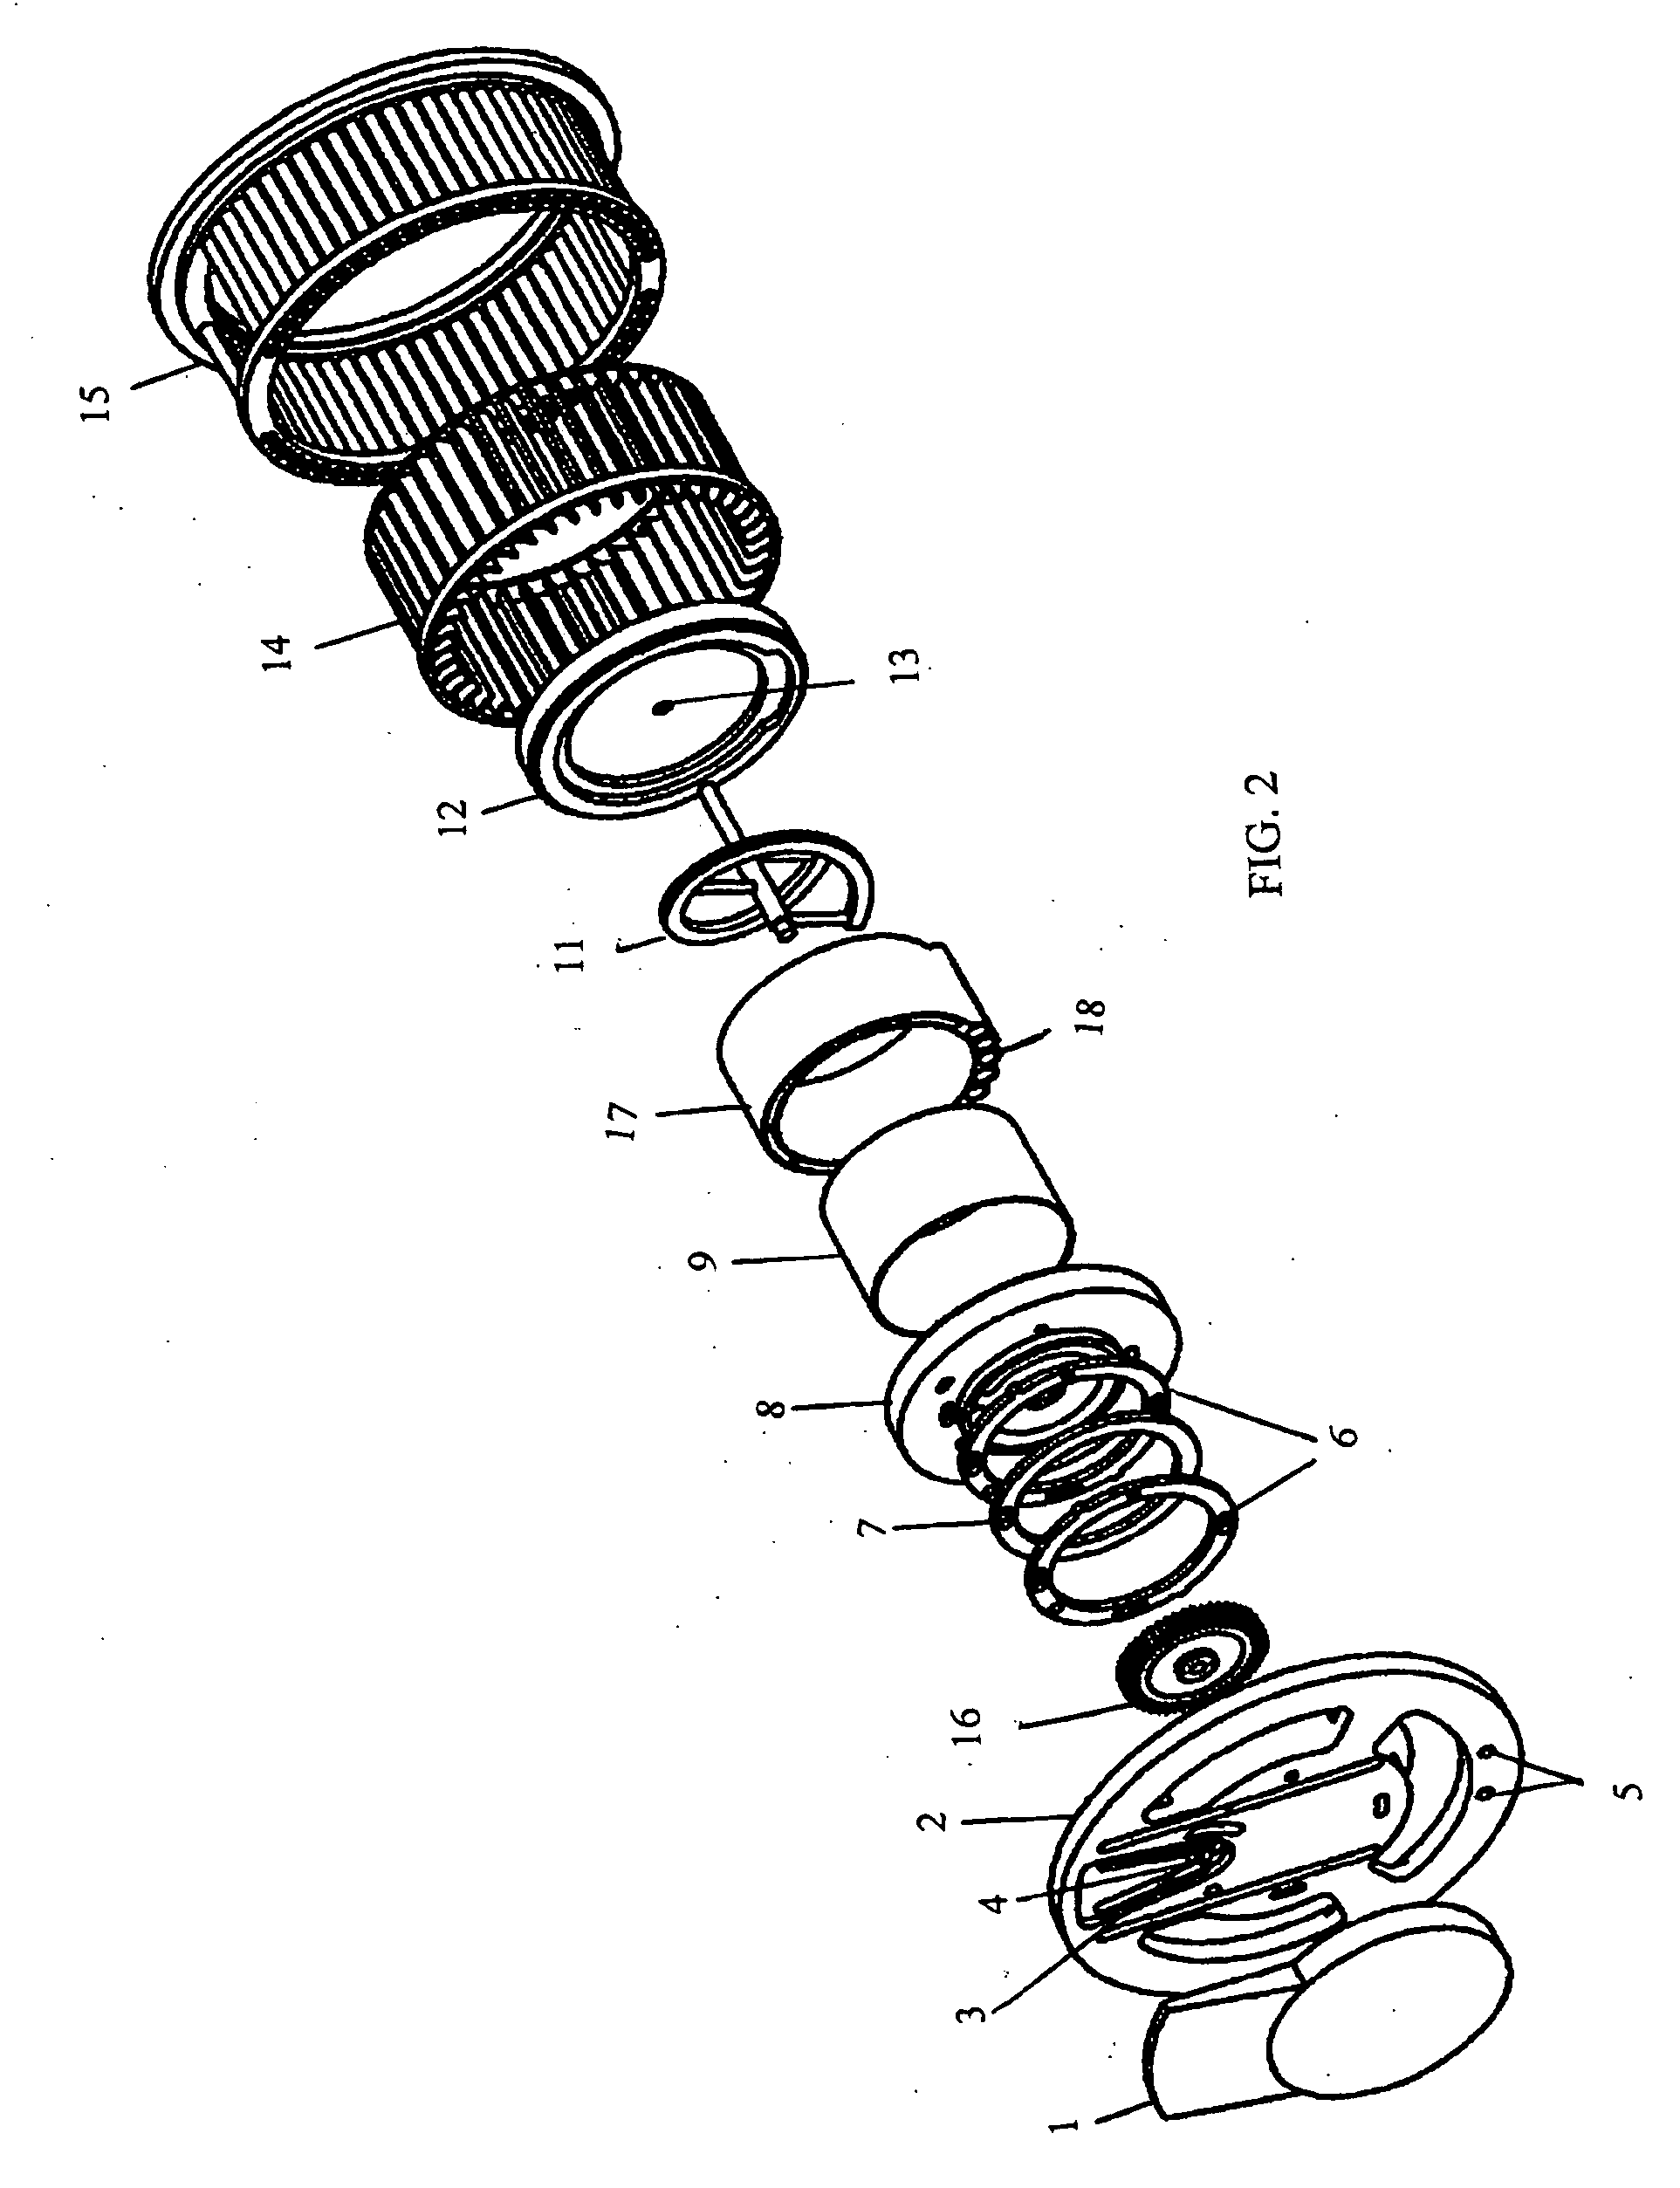 Multiple application purification and recycling device